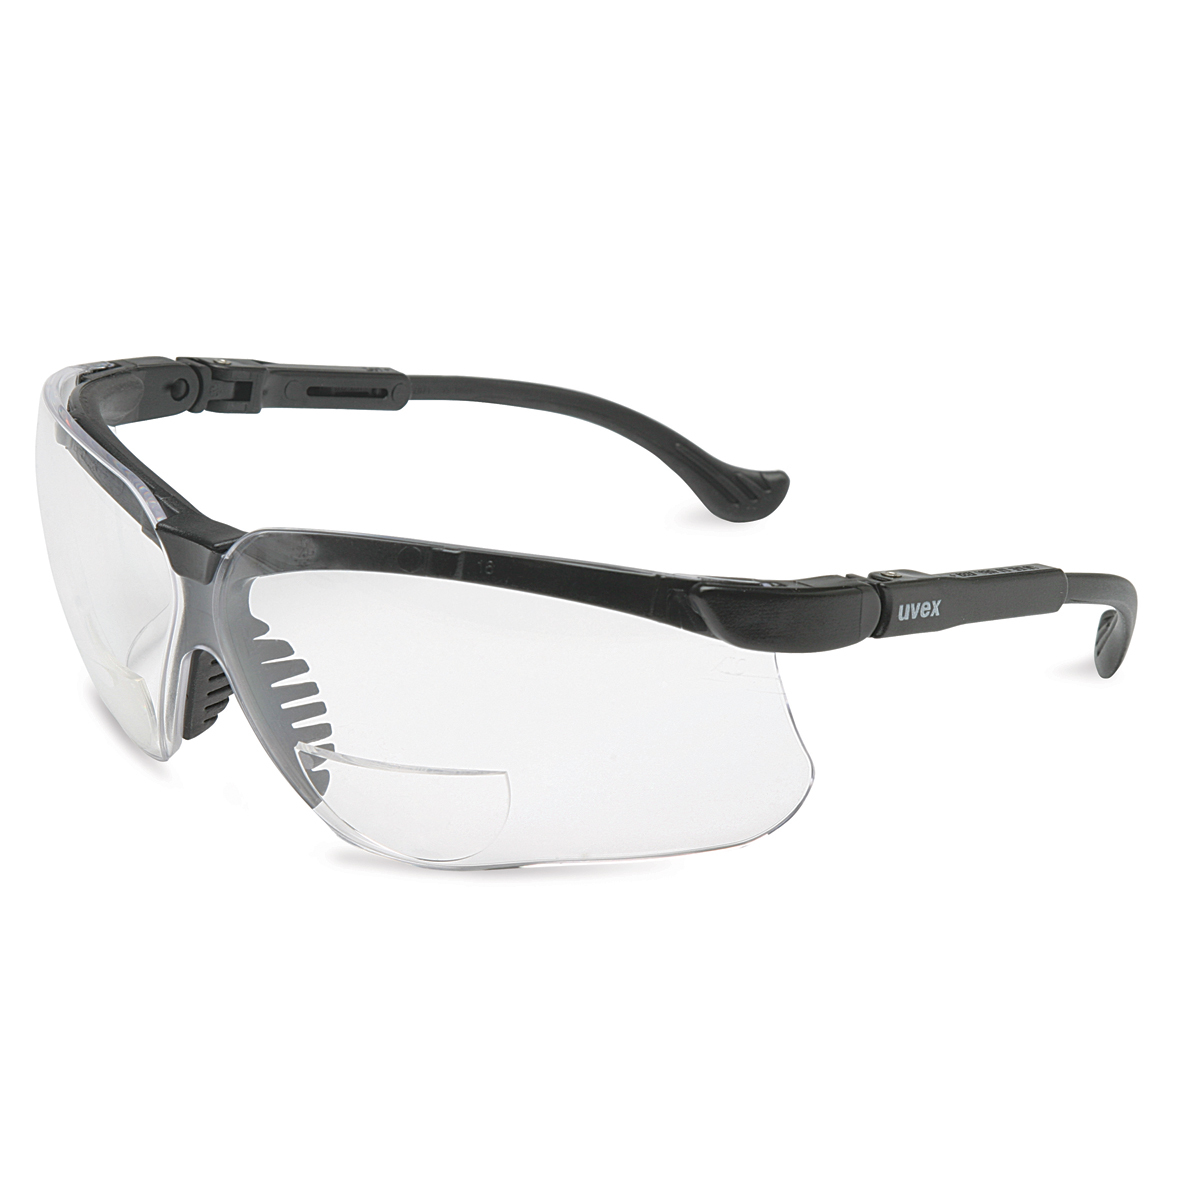 Honeywell Uvex Genesis® 3 Diopter Black Safety Glasses With Clear Anti-Scratch/Hard Coat Lens (Availability restrictions apply.)